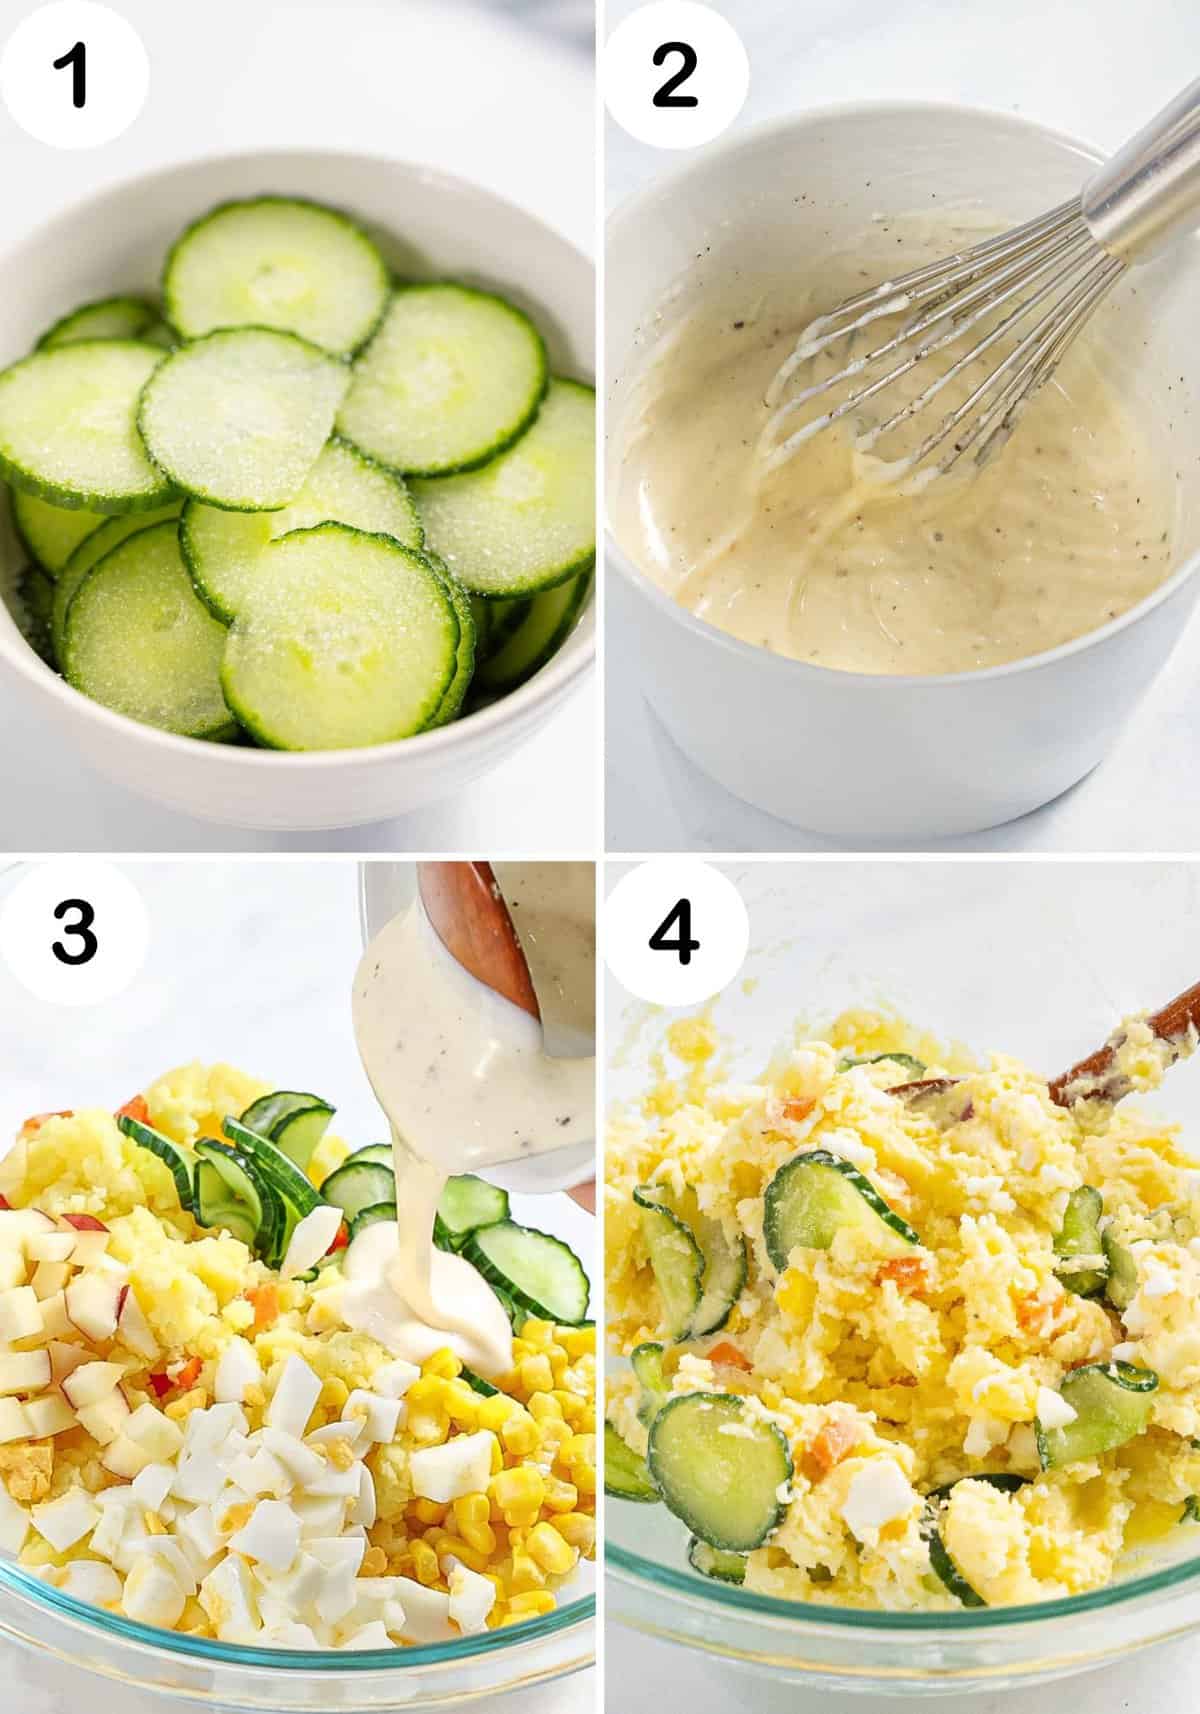 Step-by-step photo instructions on how to make Korean potato salad.